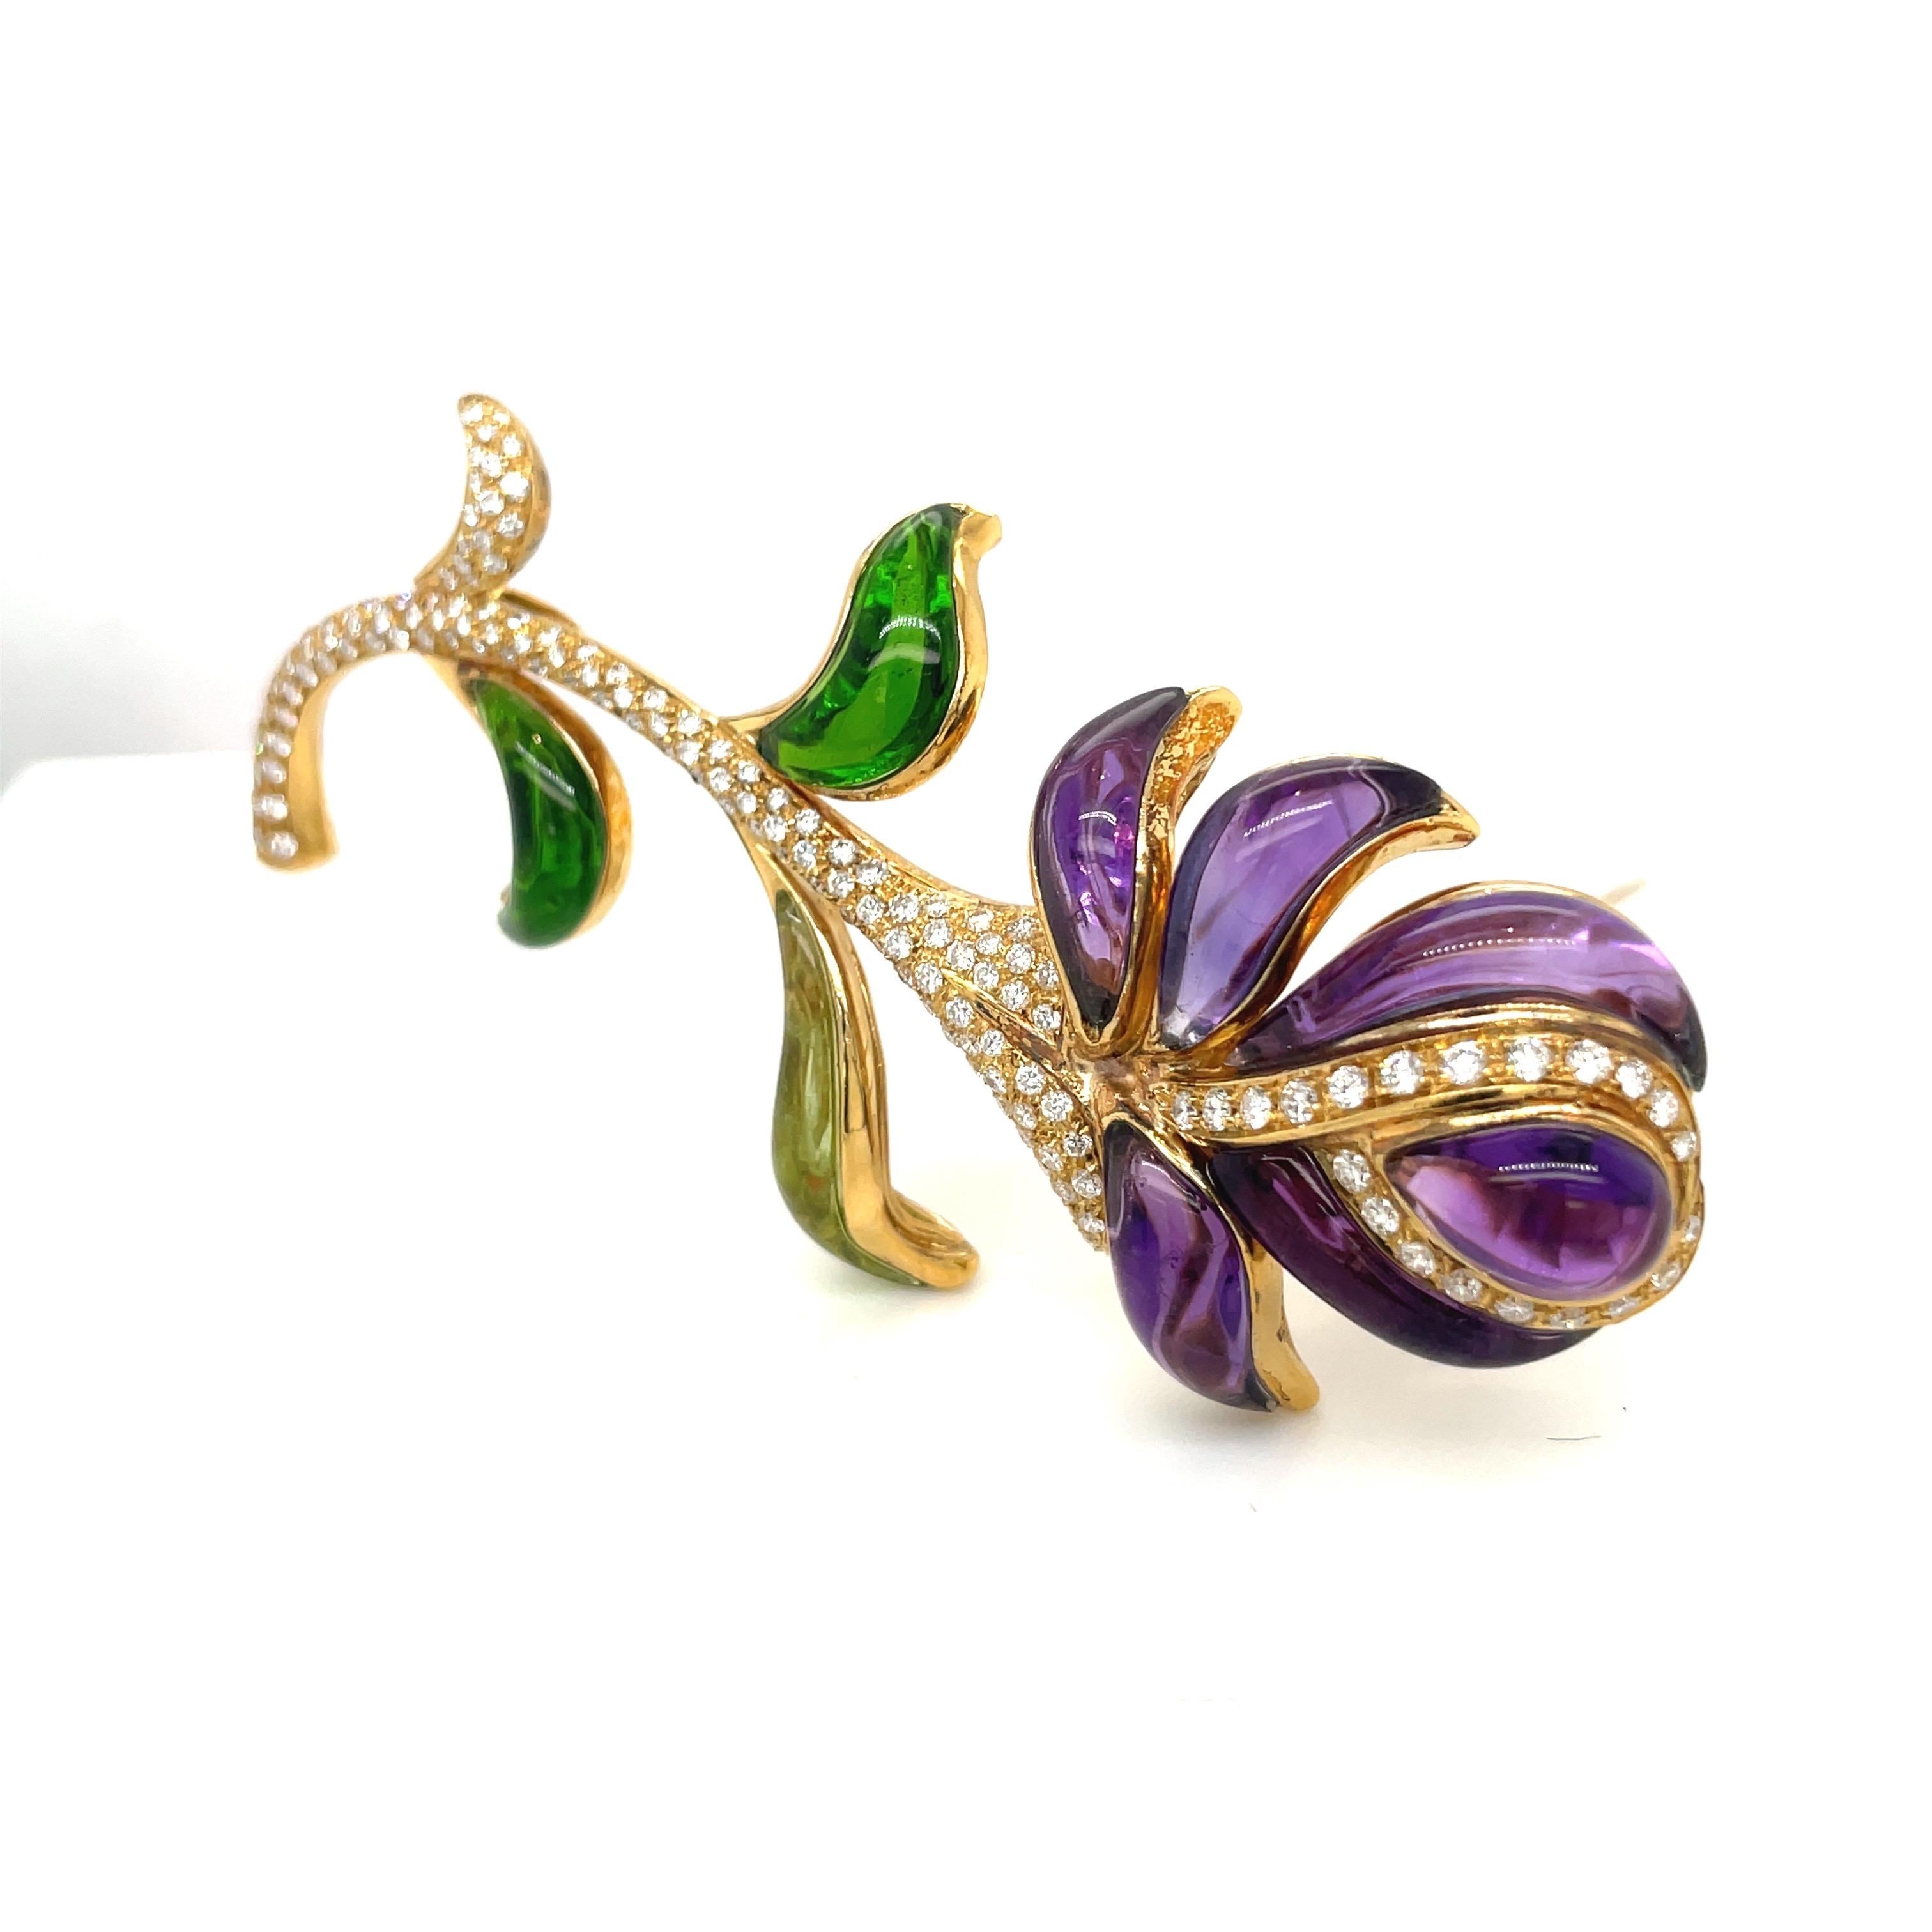 Contemporary Roberto Casarin 18k Gold Cabochon Amethyst, Green Tourmaline and Diamond Brooch For Sale